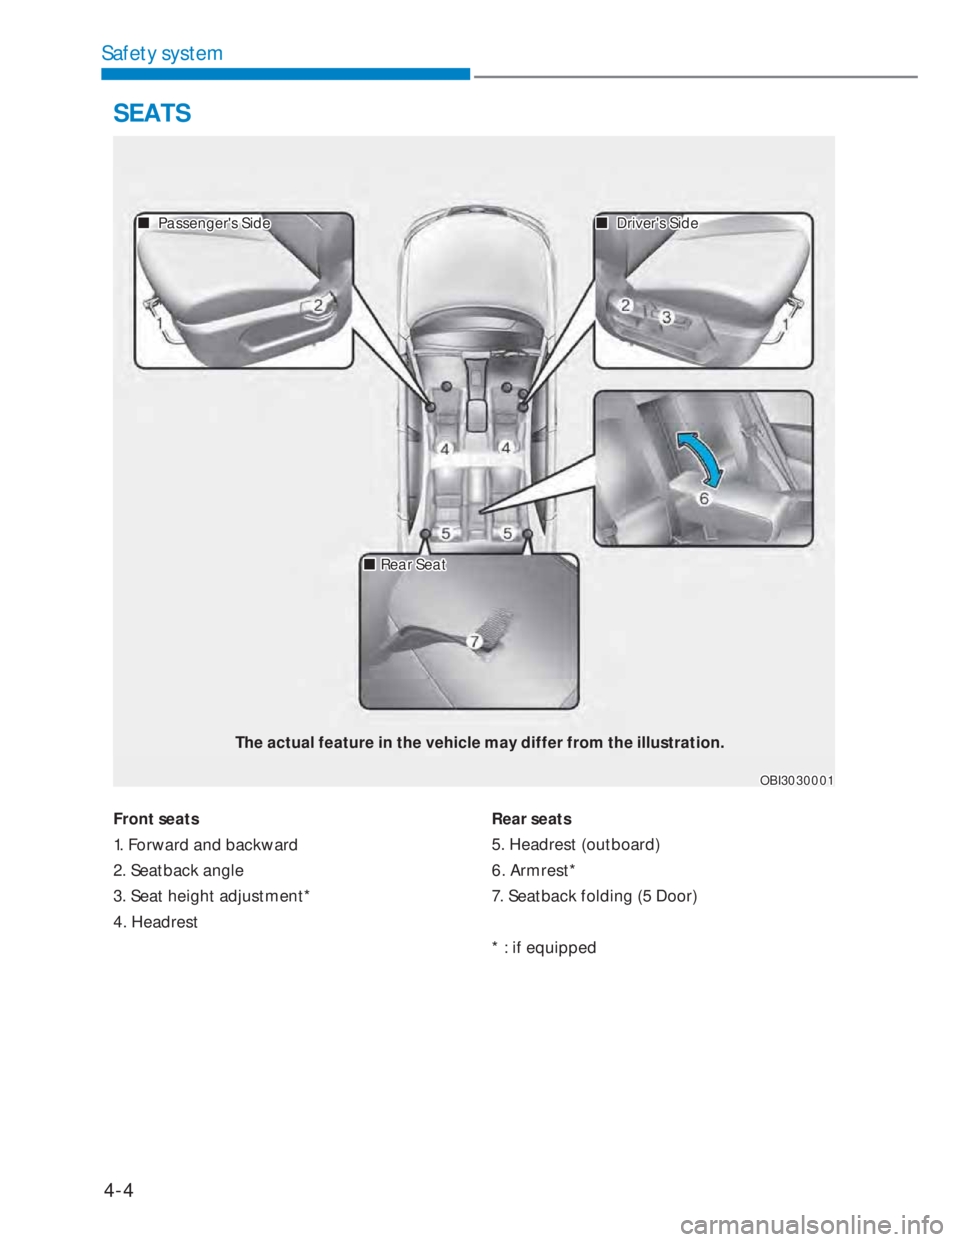 HYUNDAI I20 2021  Owners Manual 4-4
Safety system
Front seats
1. Forward and backward
2. Seatback angle
3. Seat height adjustment*
4. HeadrestRear seats
5. Headrest (outboard)
6. Armrest*
7. Seatback folding (5 Door)
* : if equipped